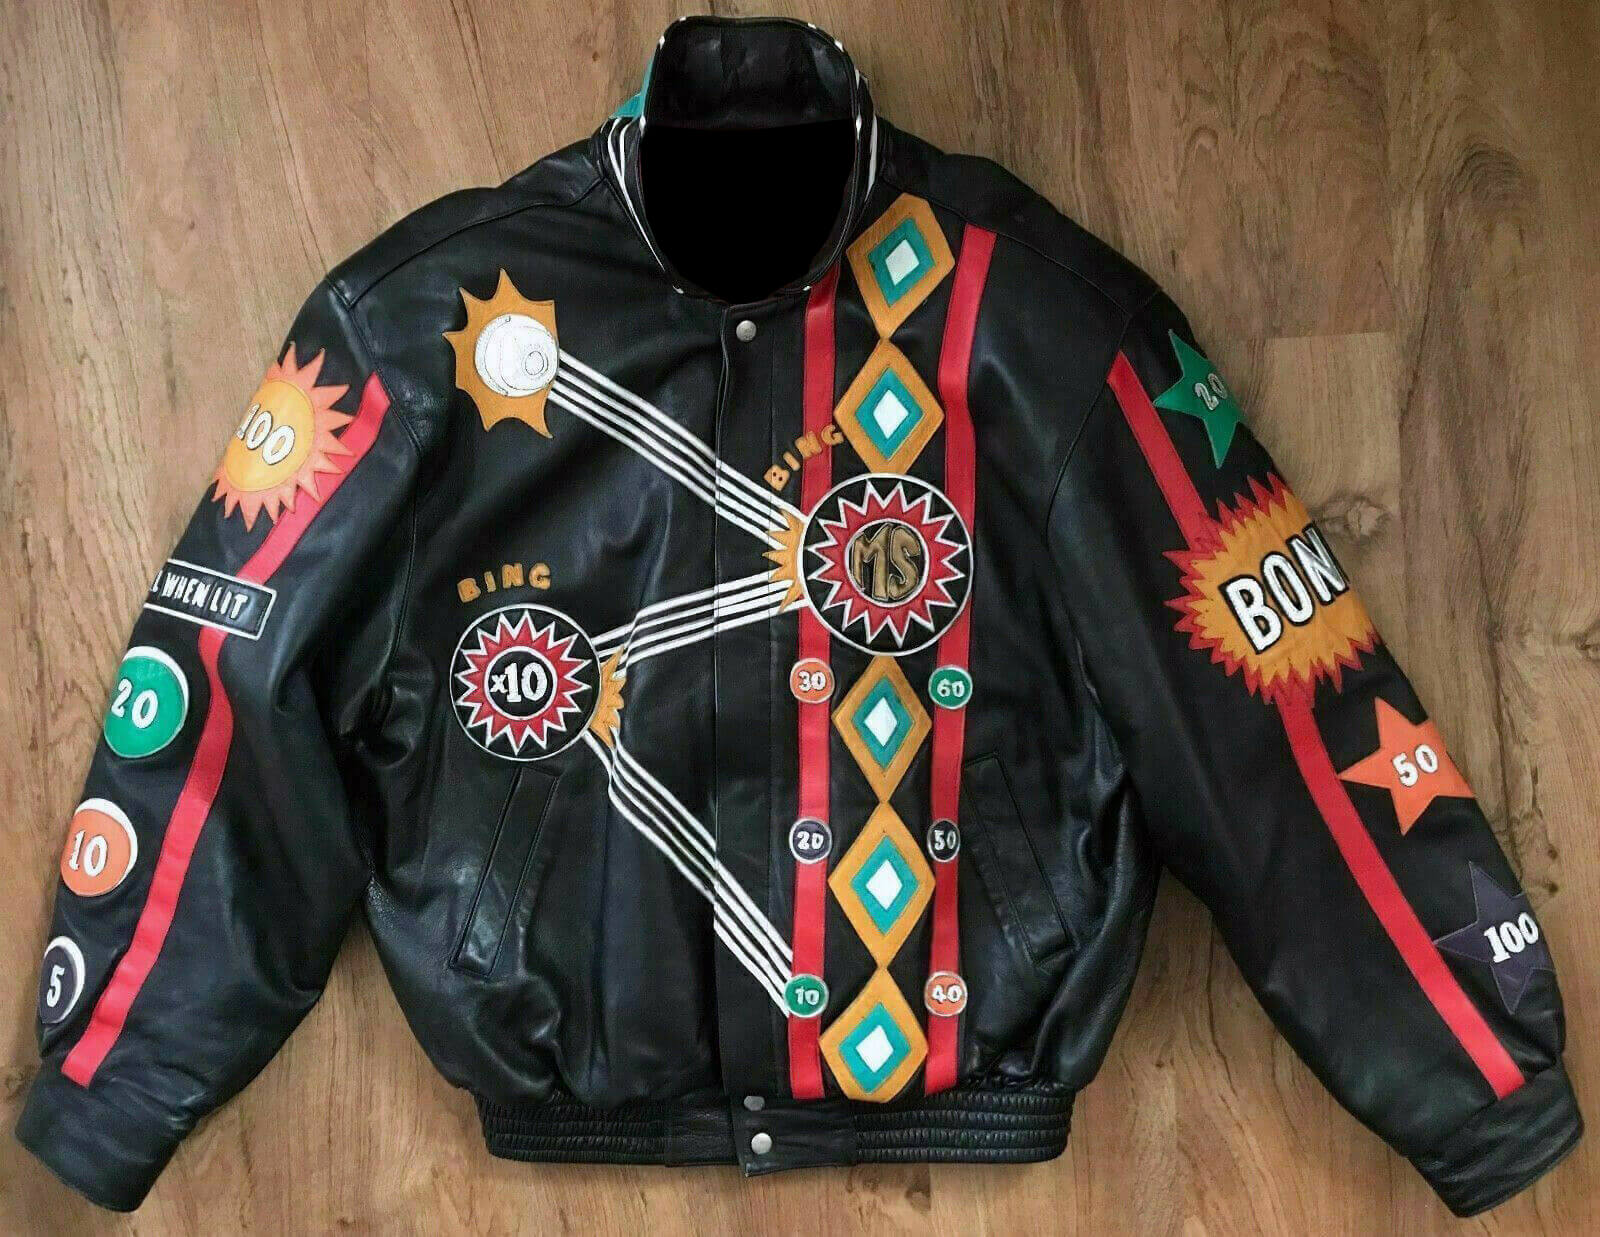 Pinball Wizard Who Leather Custom Tour Concert Jacket - Maker of Jacket